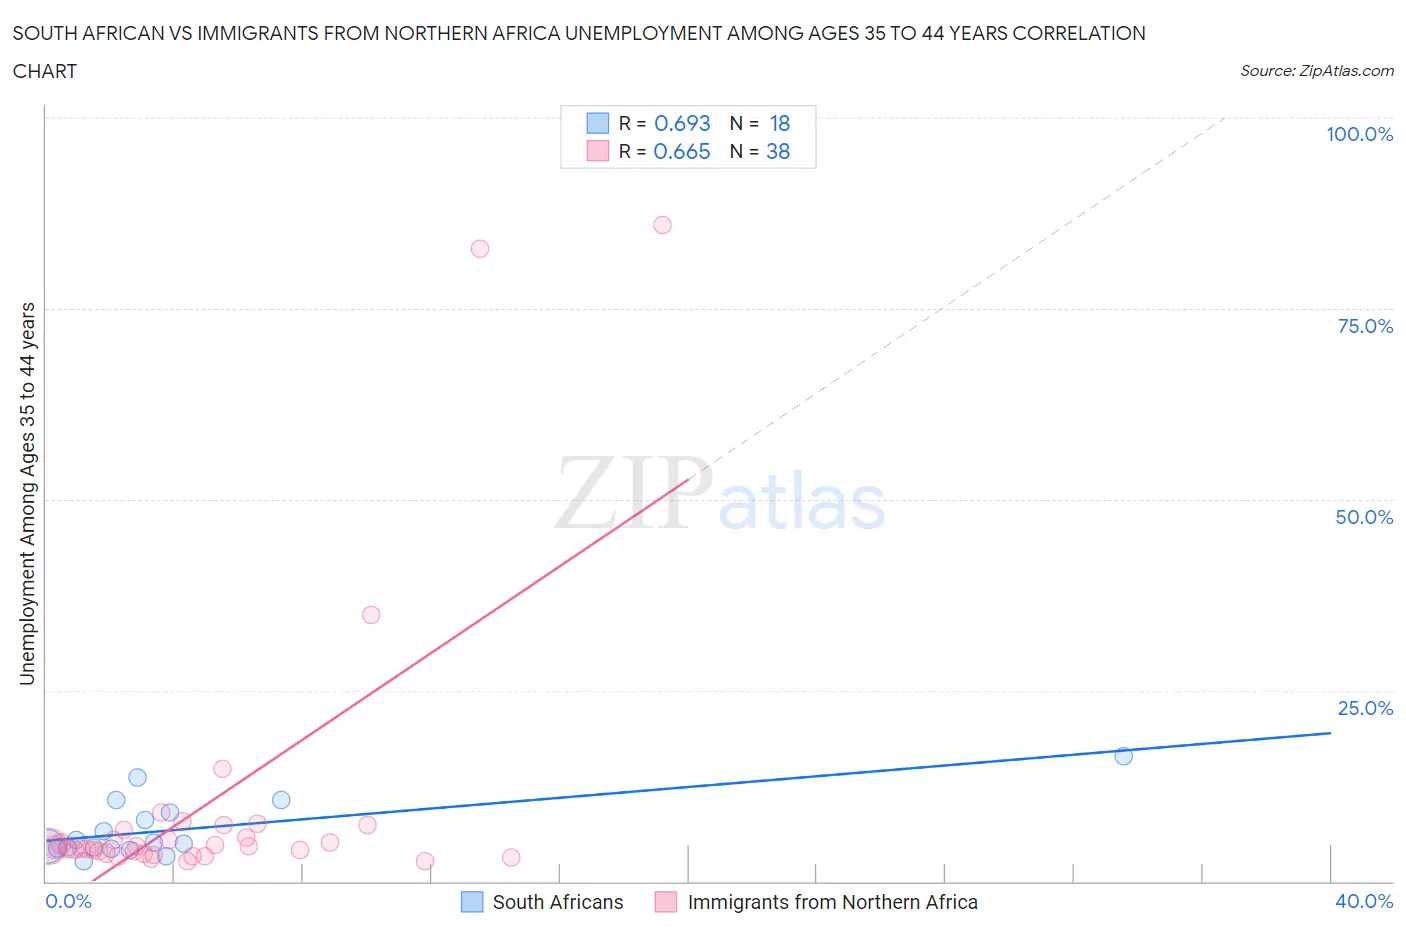 South African vs Immigrants from Northern Africa Unemployment Among Ages 35 to 44 years